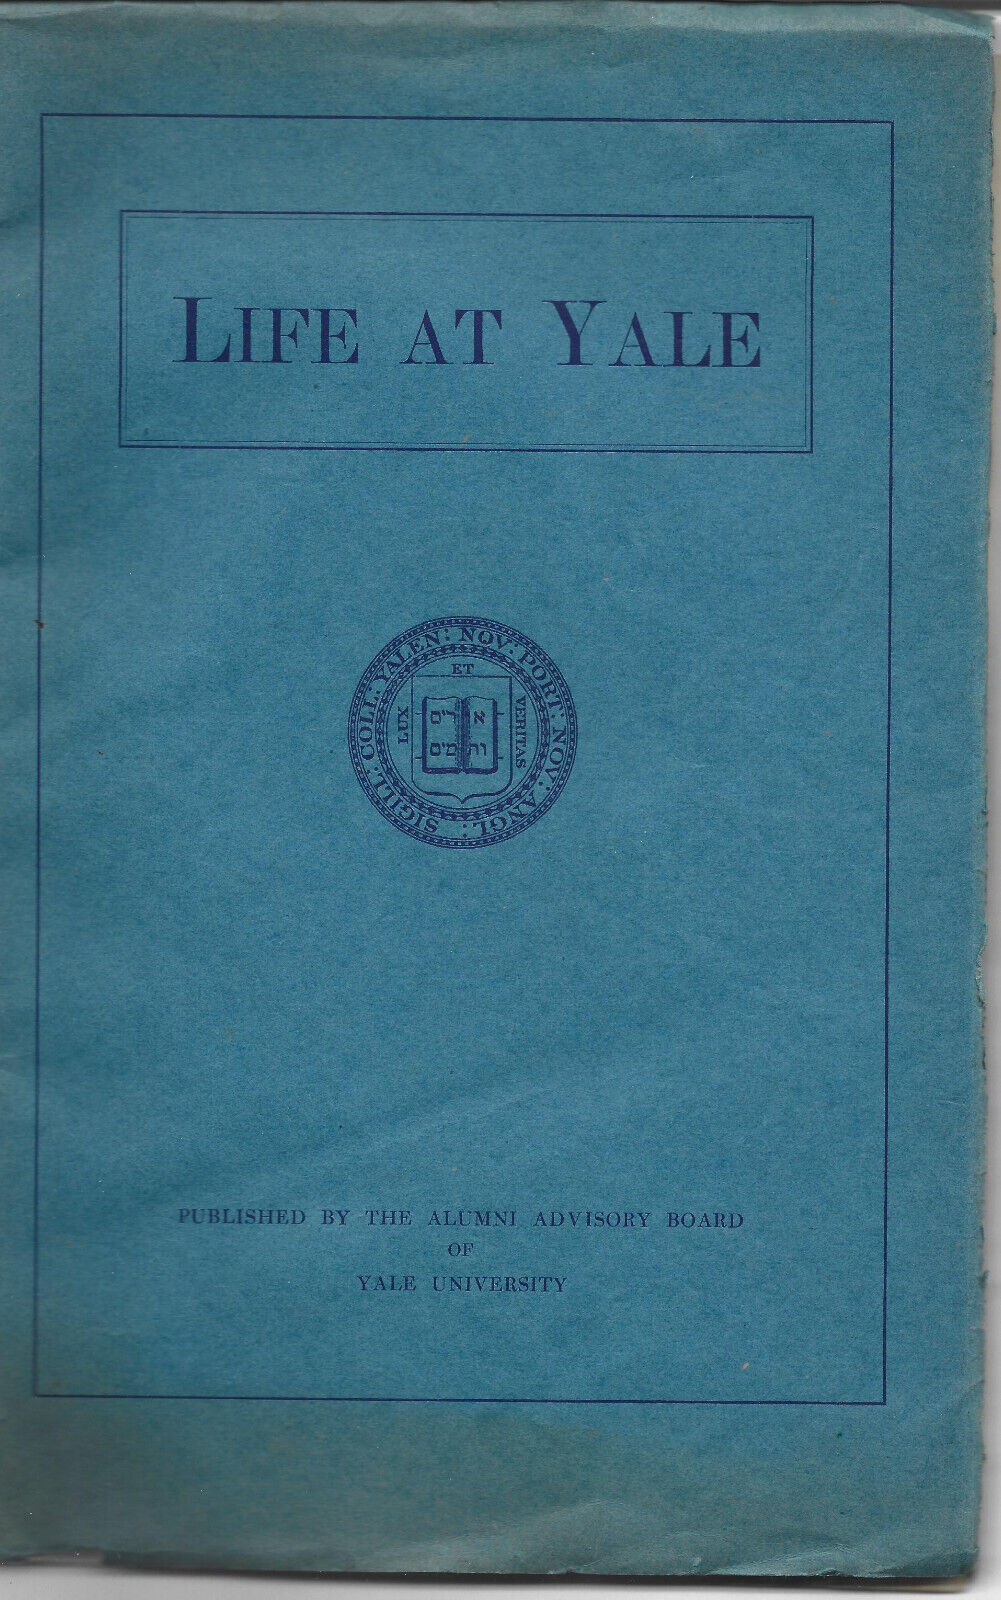 1914 Yale University Life at yale book 88 pages and insert